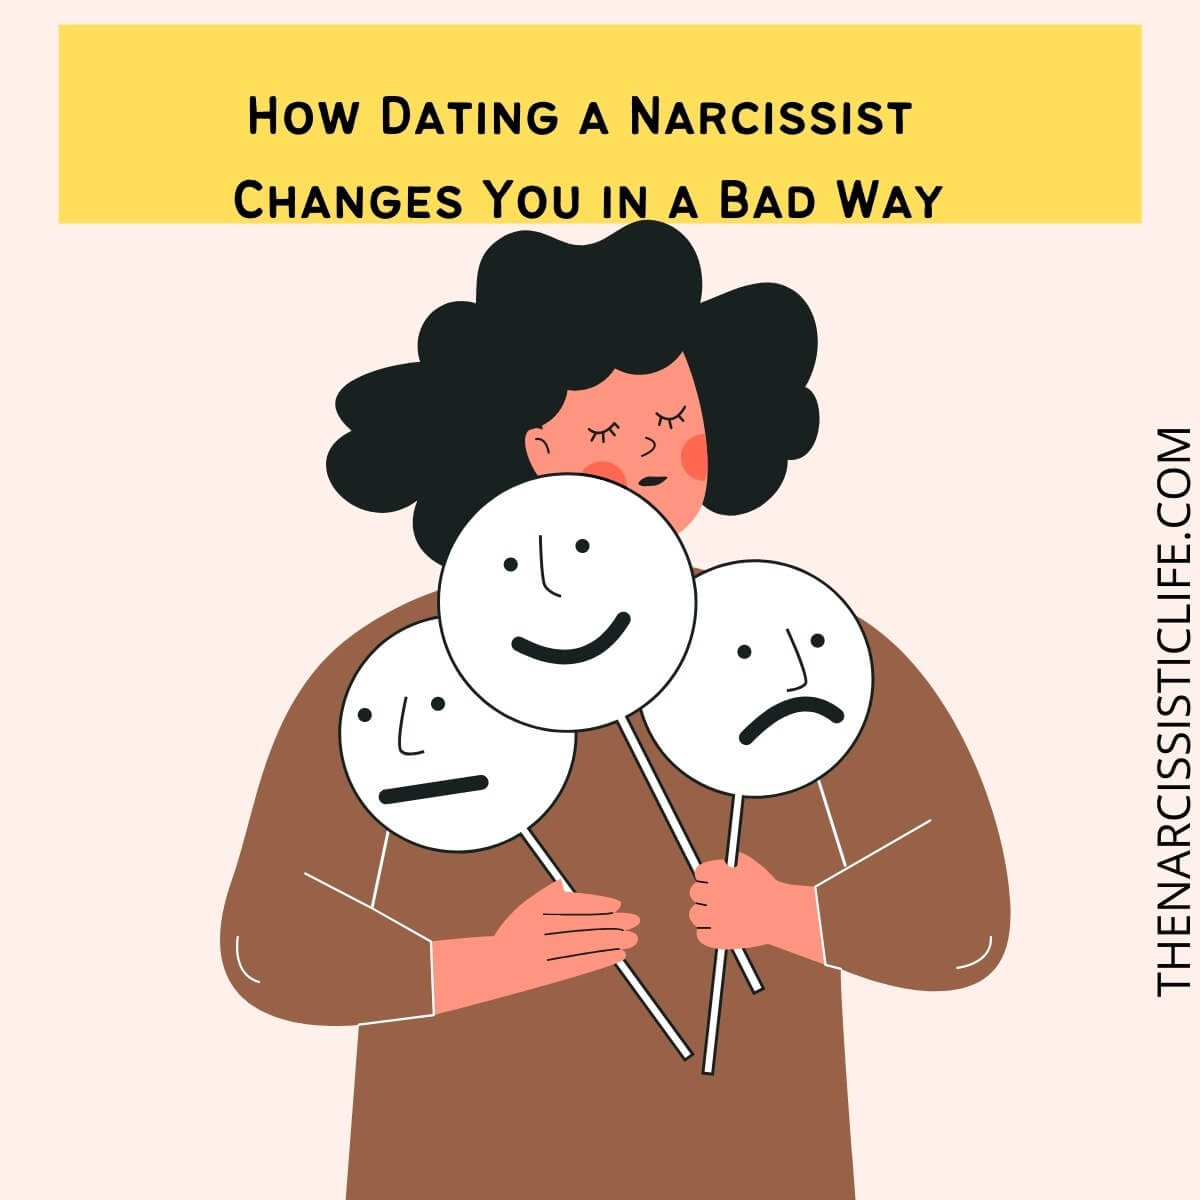 Signs that you are dating a narcissist